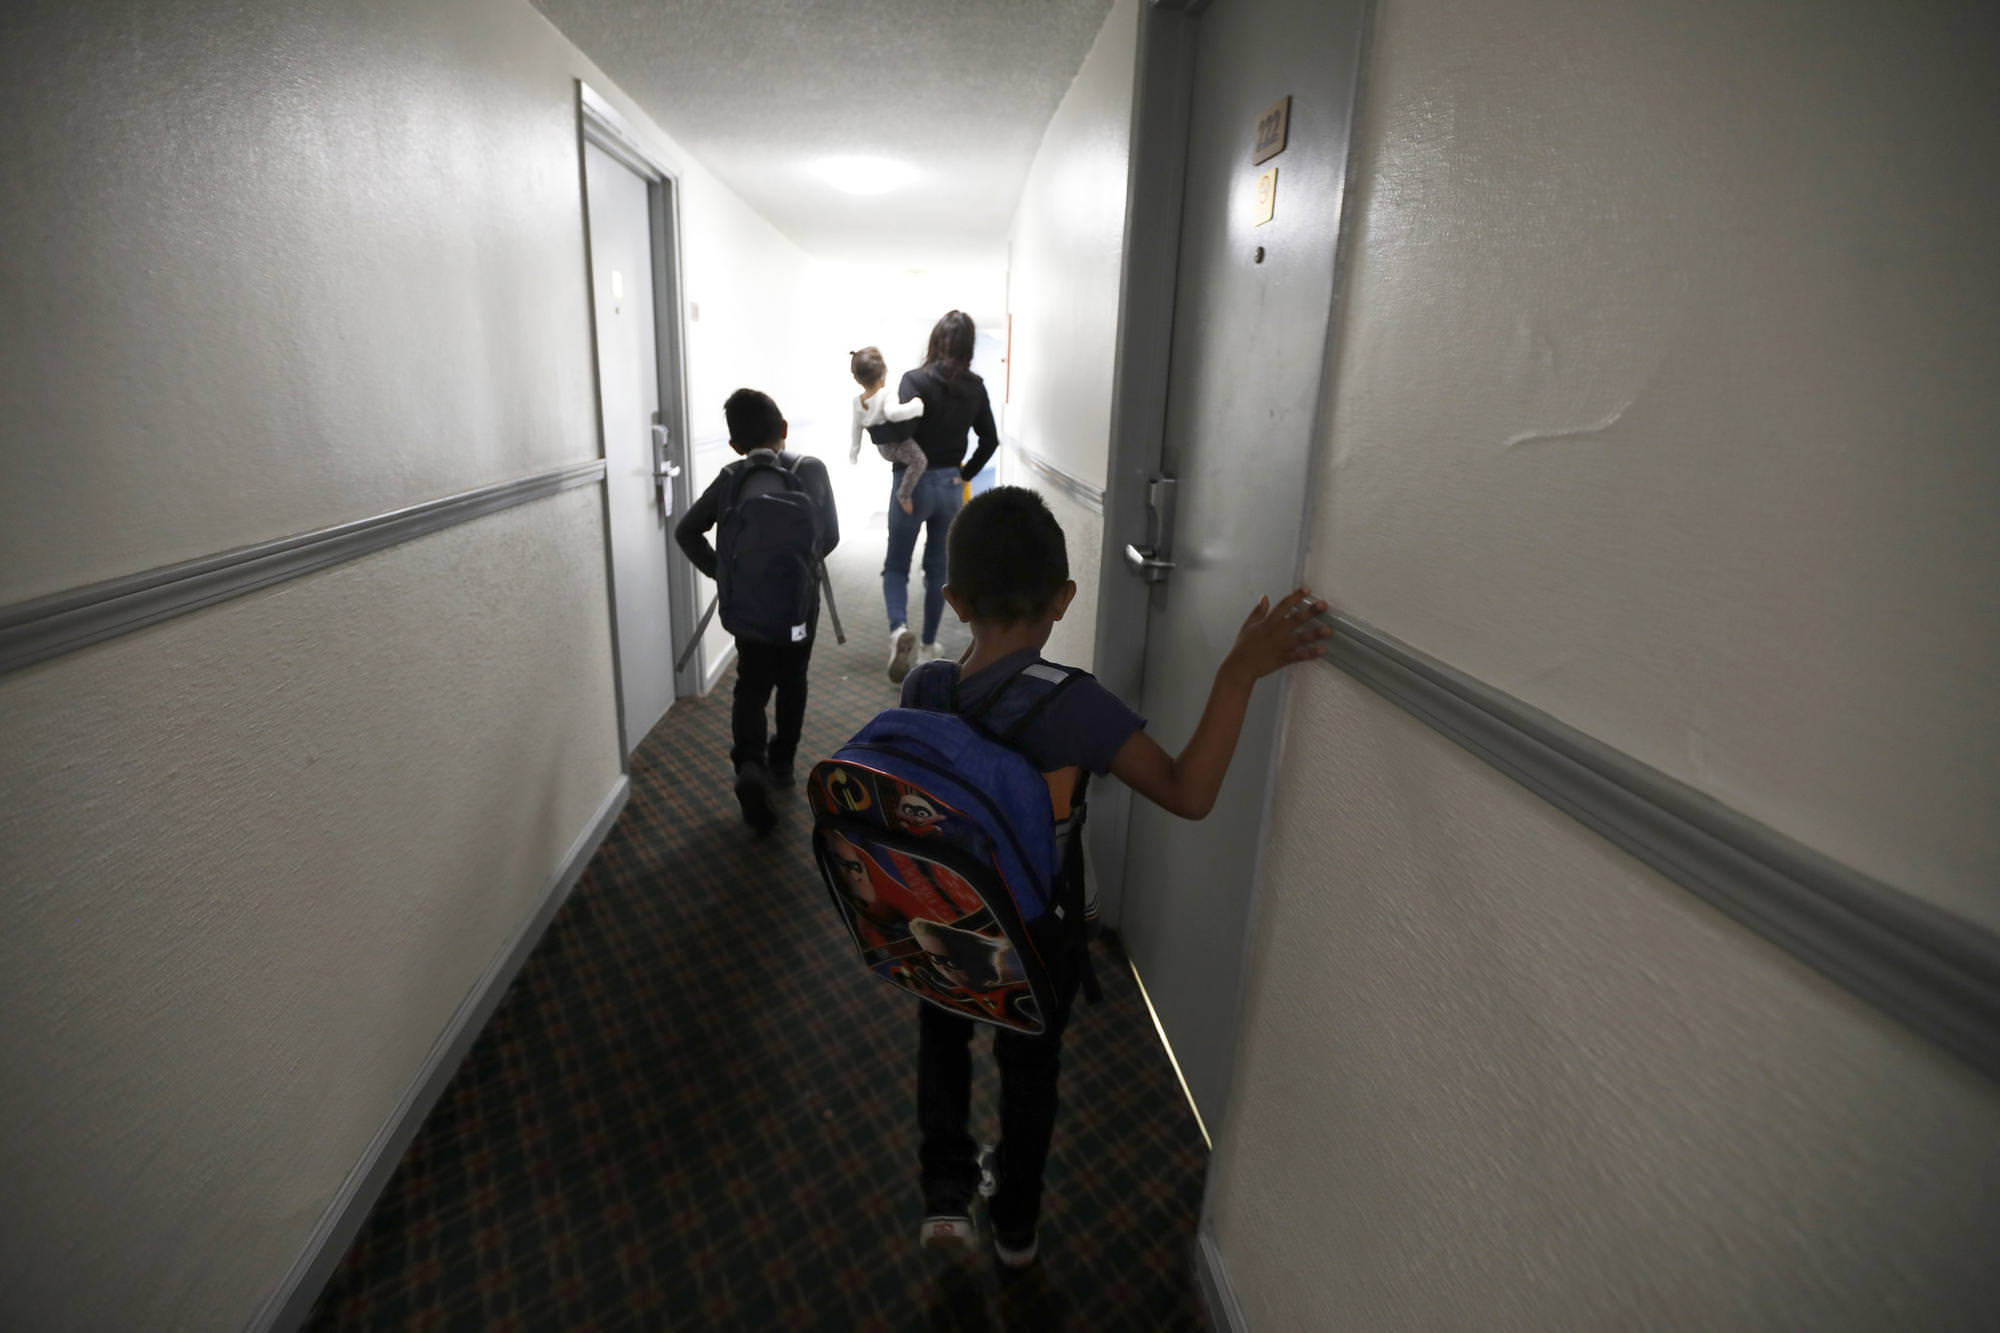 Whether home is a van, a motel or a garage, L.A.’s suburban poor children learn to survive